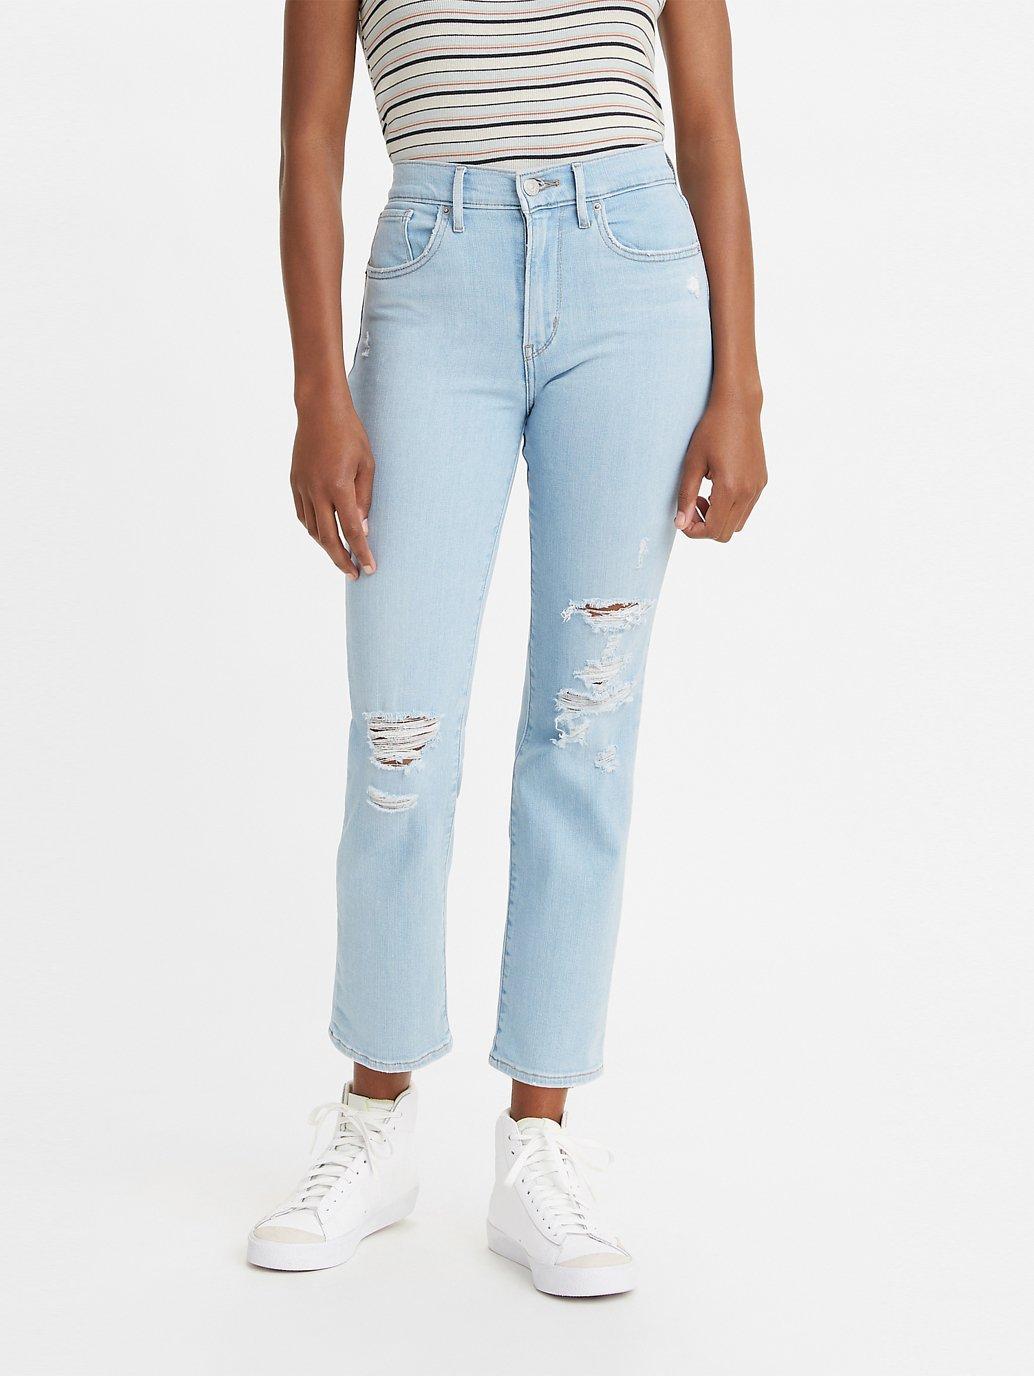 Buy Levi's® Women's 724 High-Rise Straight Crop Jeans| Levi’s® Official ...